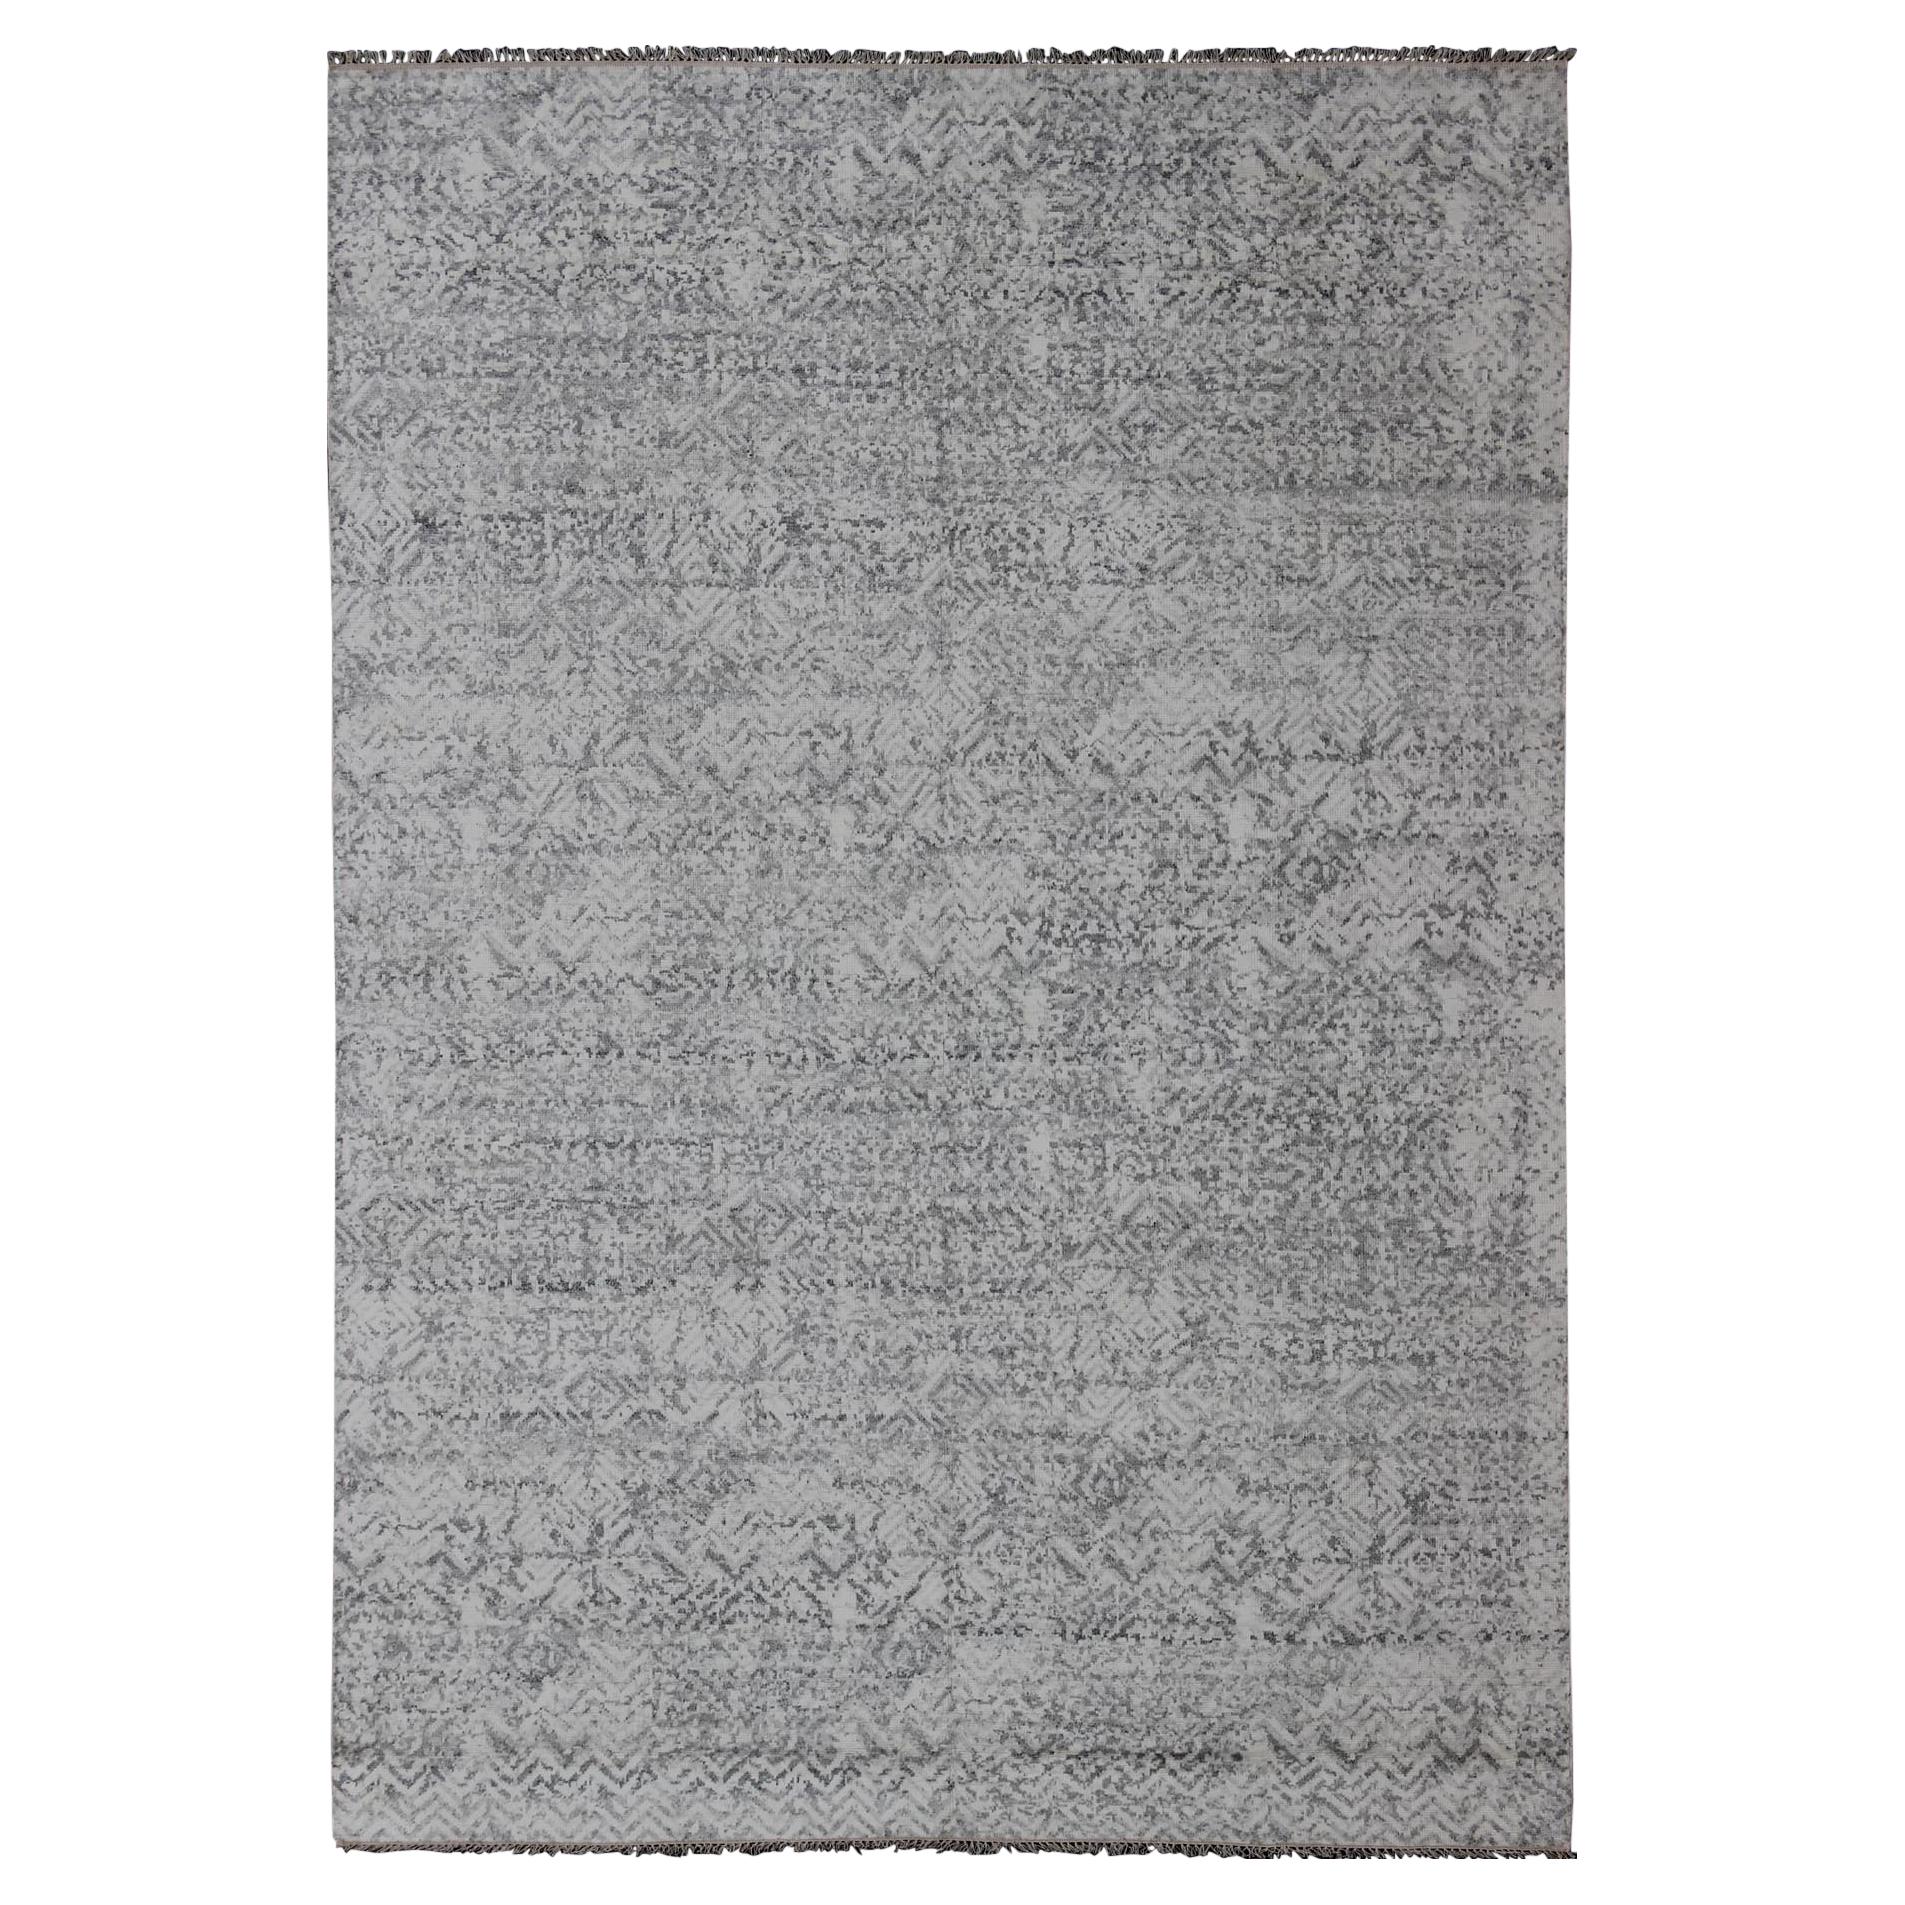 Large Modern Rug With All-Over Minimalist Pattern in Lt. Charcoal, Gray, Silver For Sale